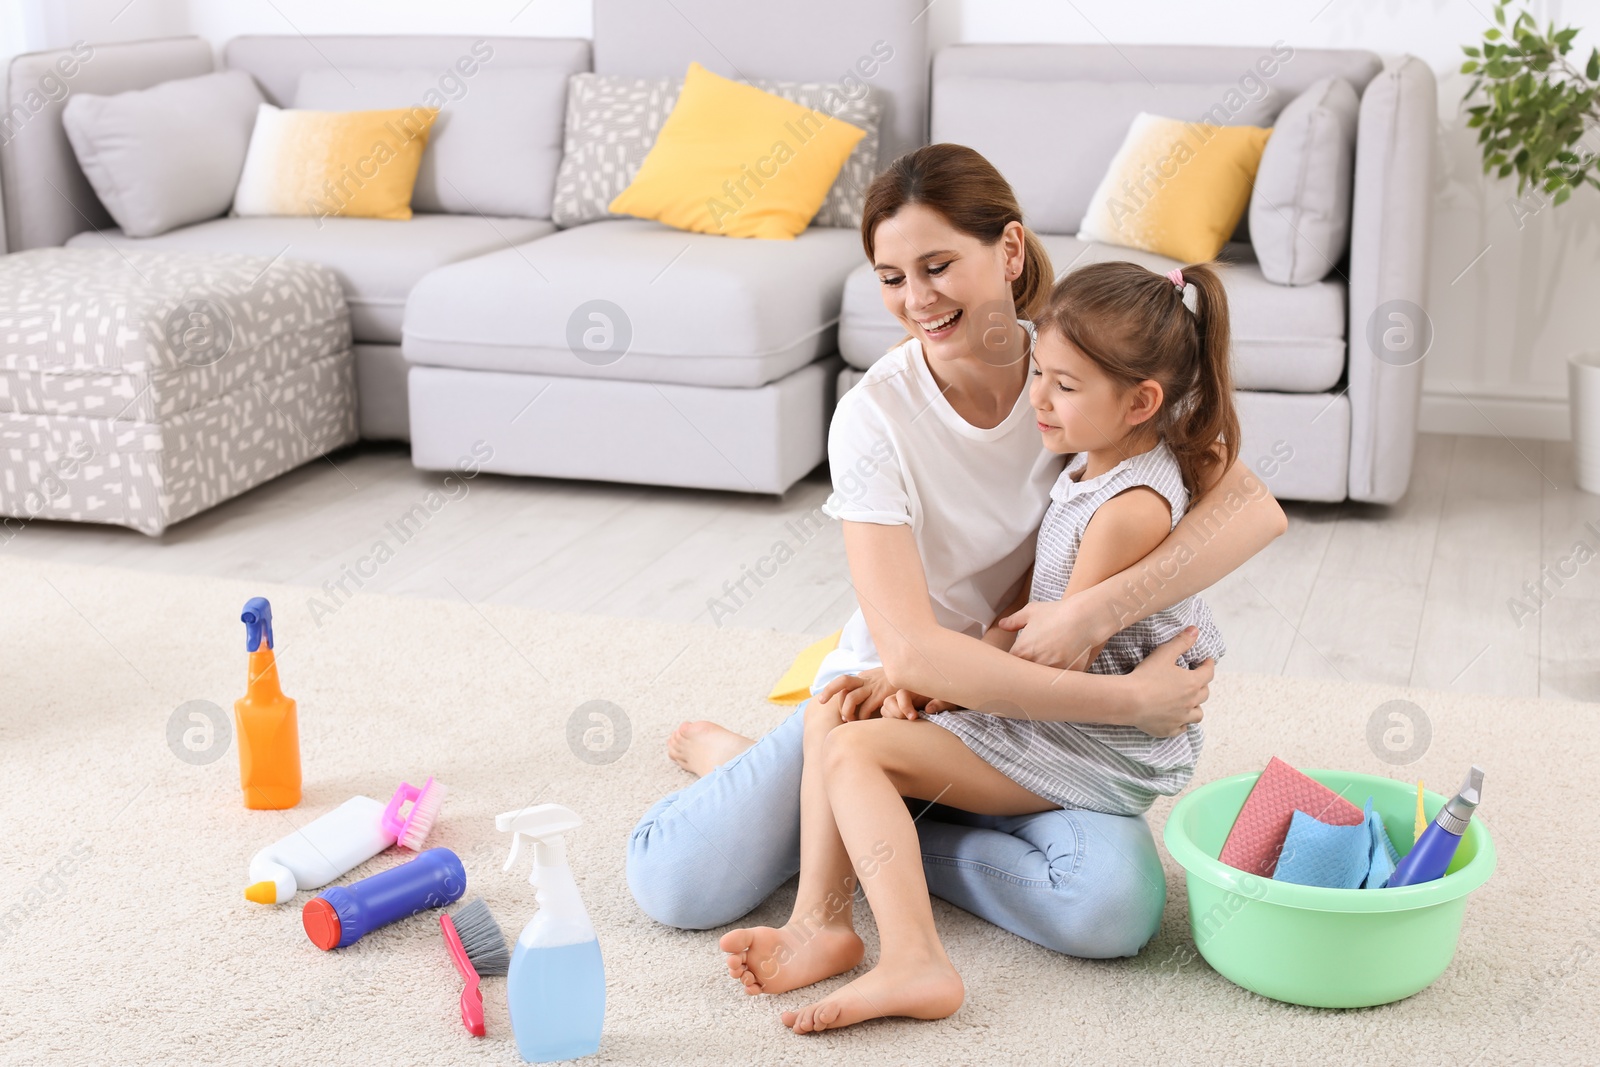 Photo of Housewife and daughter resting after cleaning in room